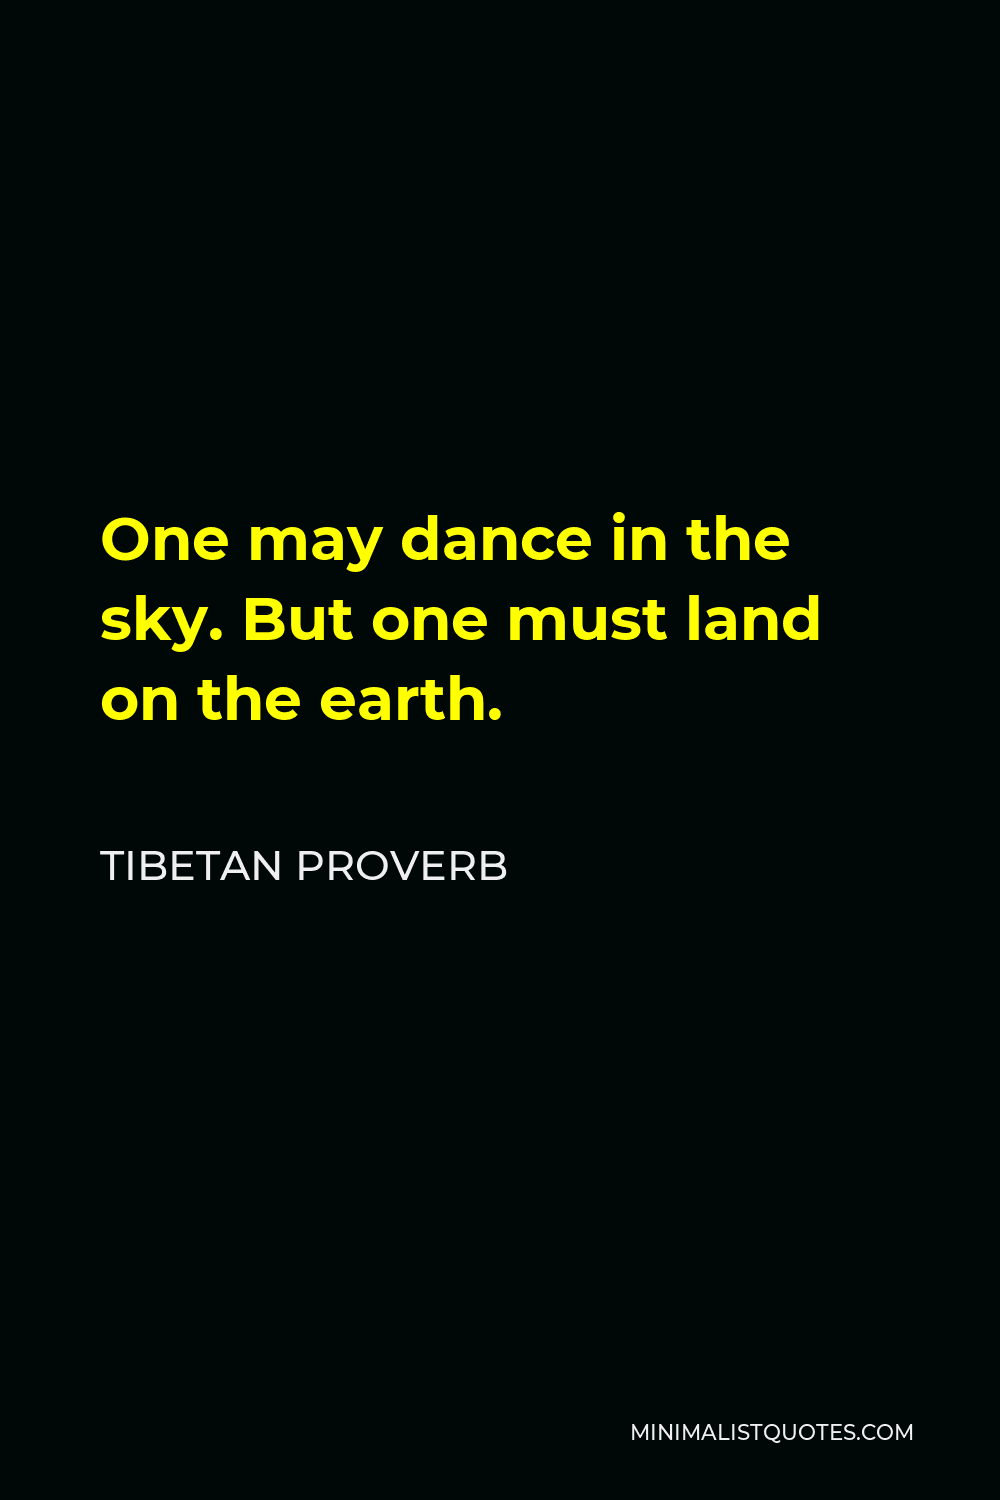 Tibetan Proverb Quote - One may dance in the sky. But one must land on the earth.